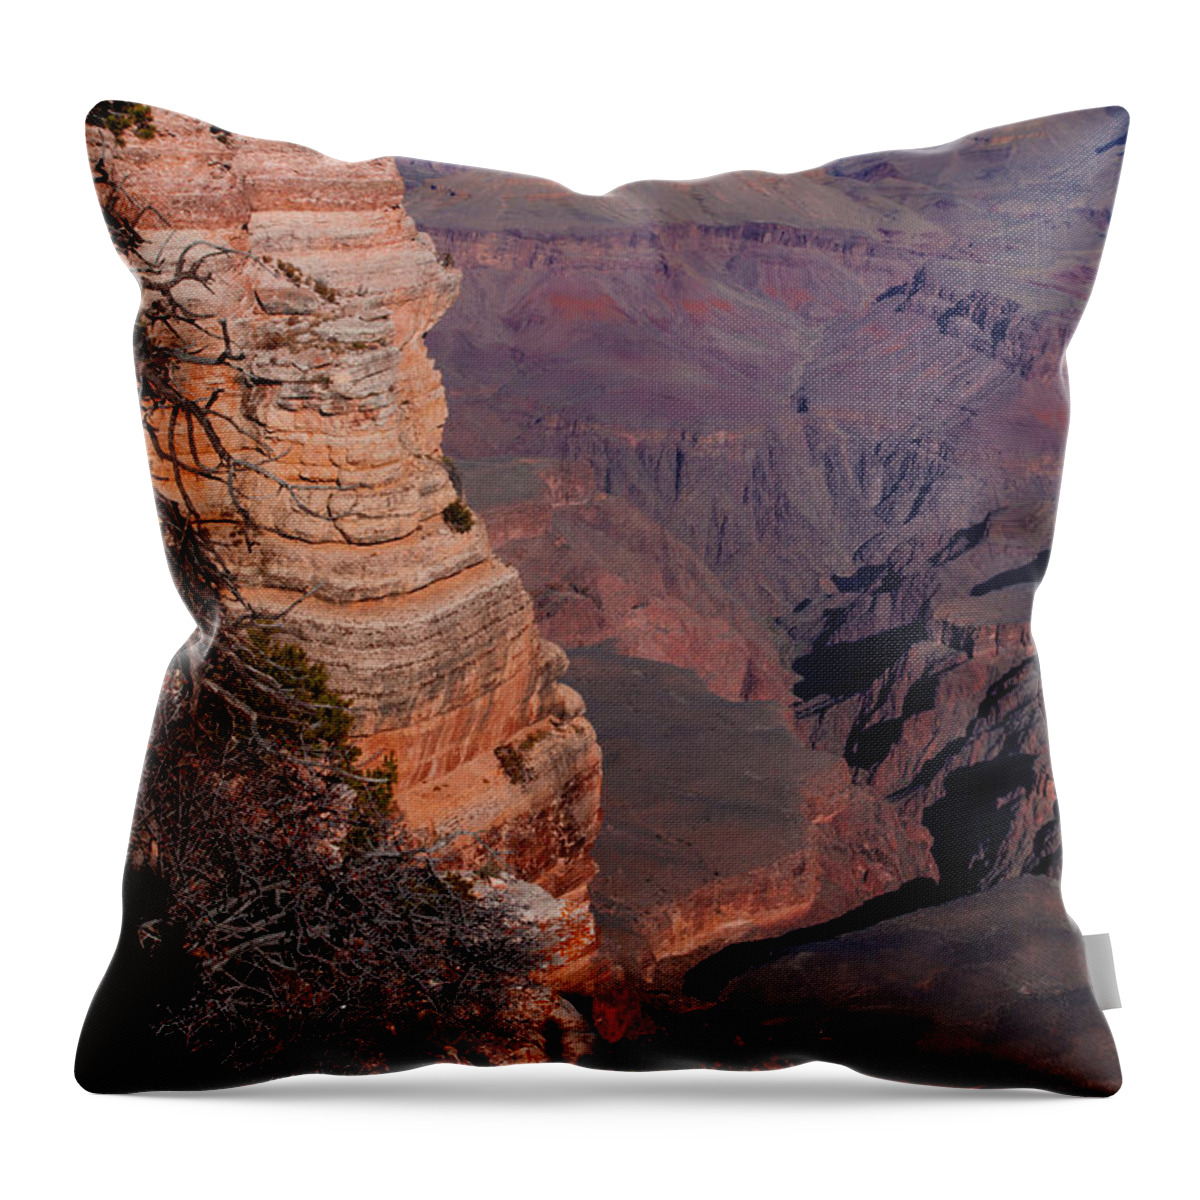 Grand Canyon National Park Throw Pillow featuring the photograph Grand Canyon 11 by Donna Corless